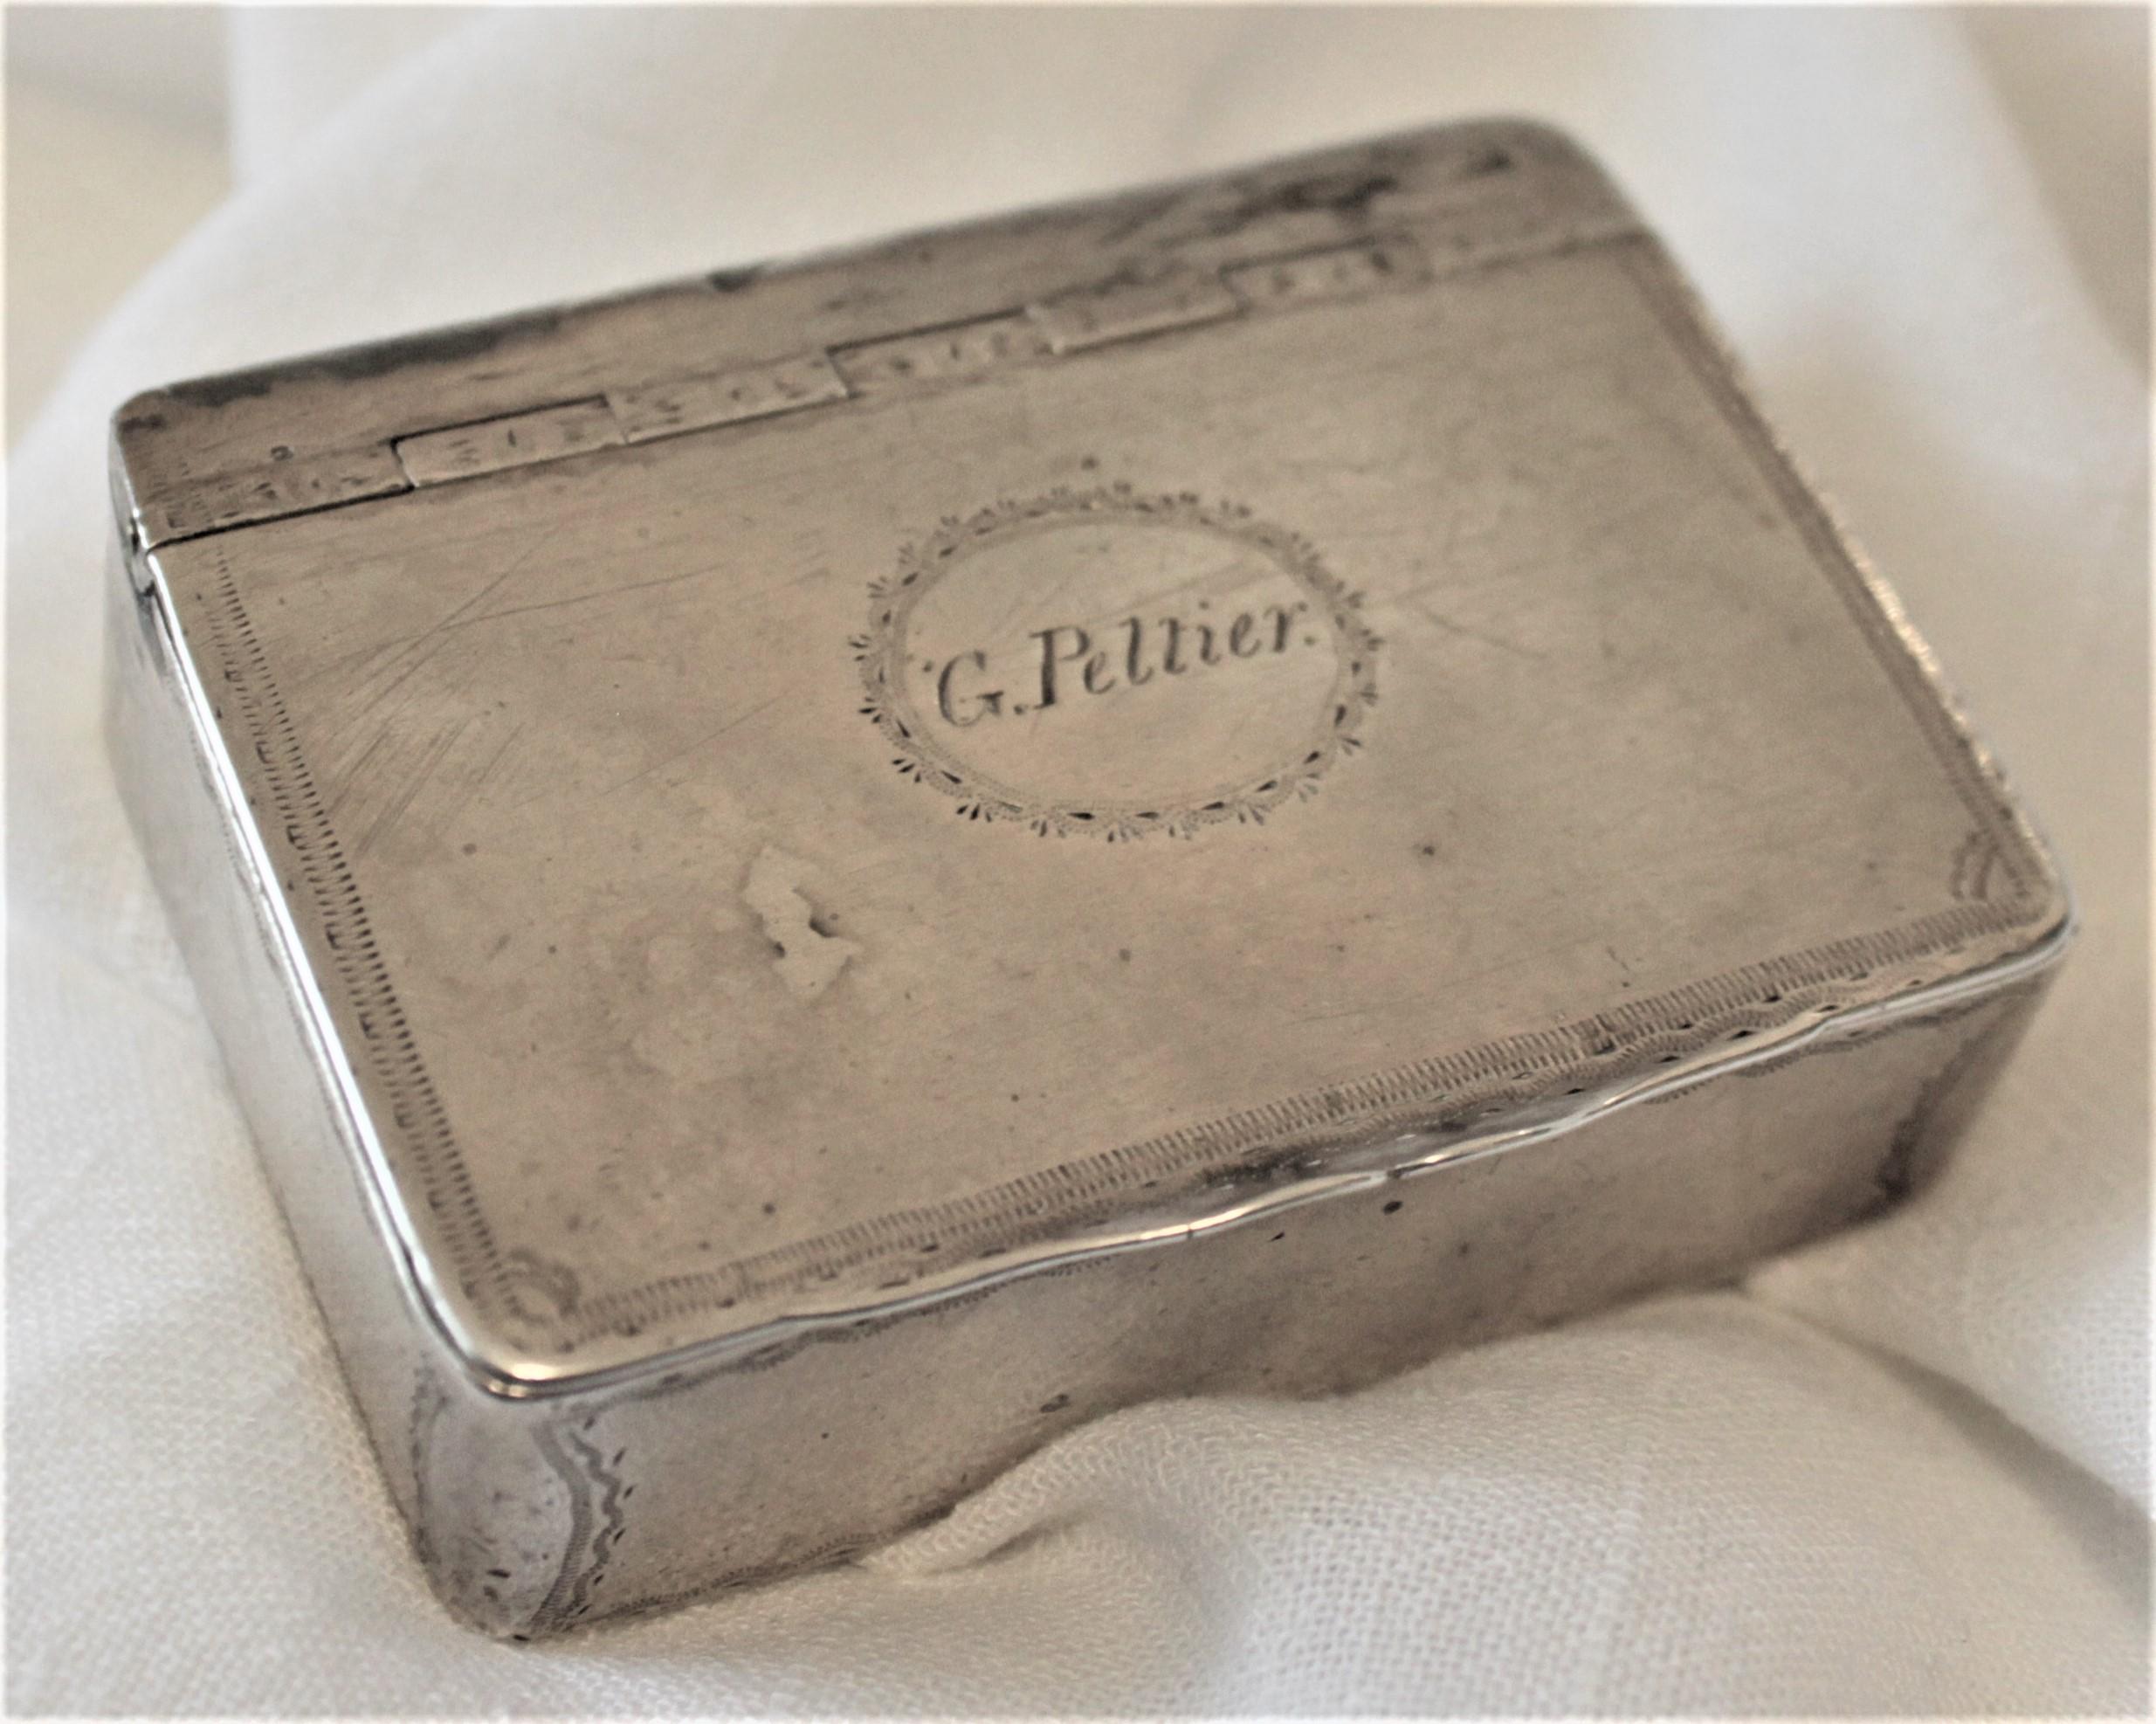 This antique sterling silver snuff box was made by the noted Canadian silversmith Paul Morin from Quebec City of Lower Canada, and dates to circa 1795-1805 in a period Georgian style. This very early Canadian snuff box is naively decorated in a